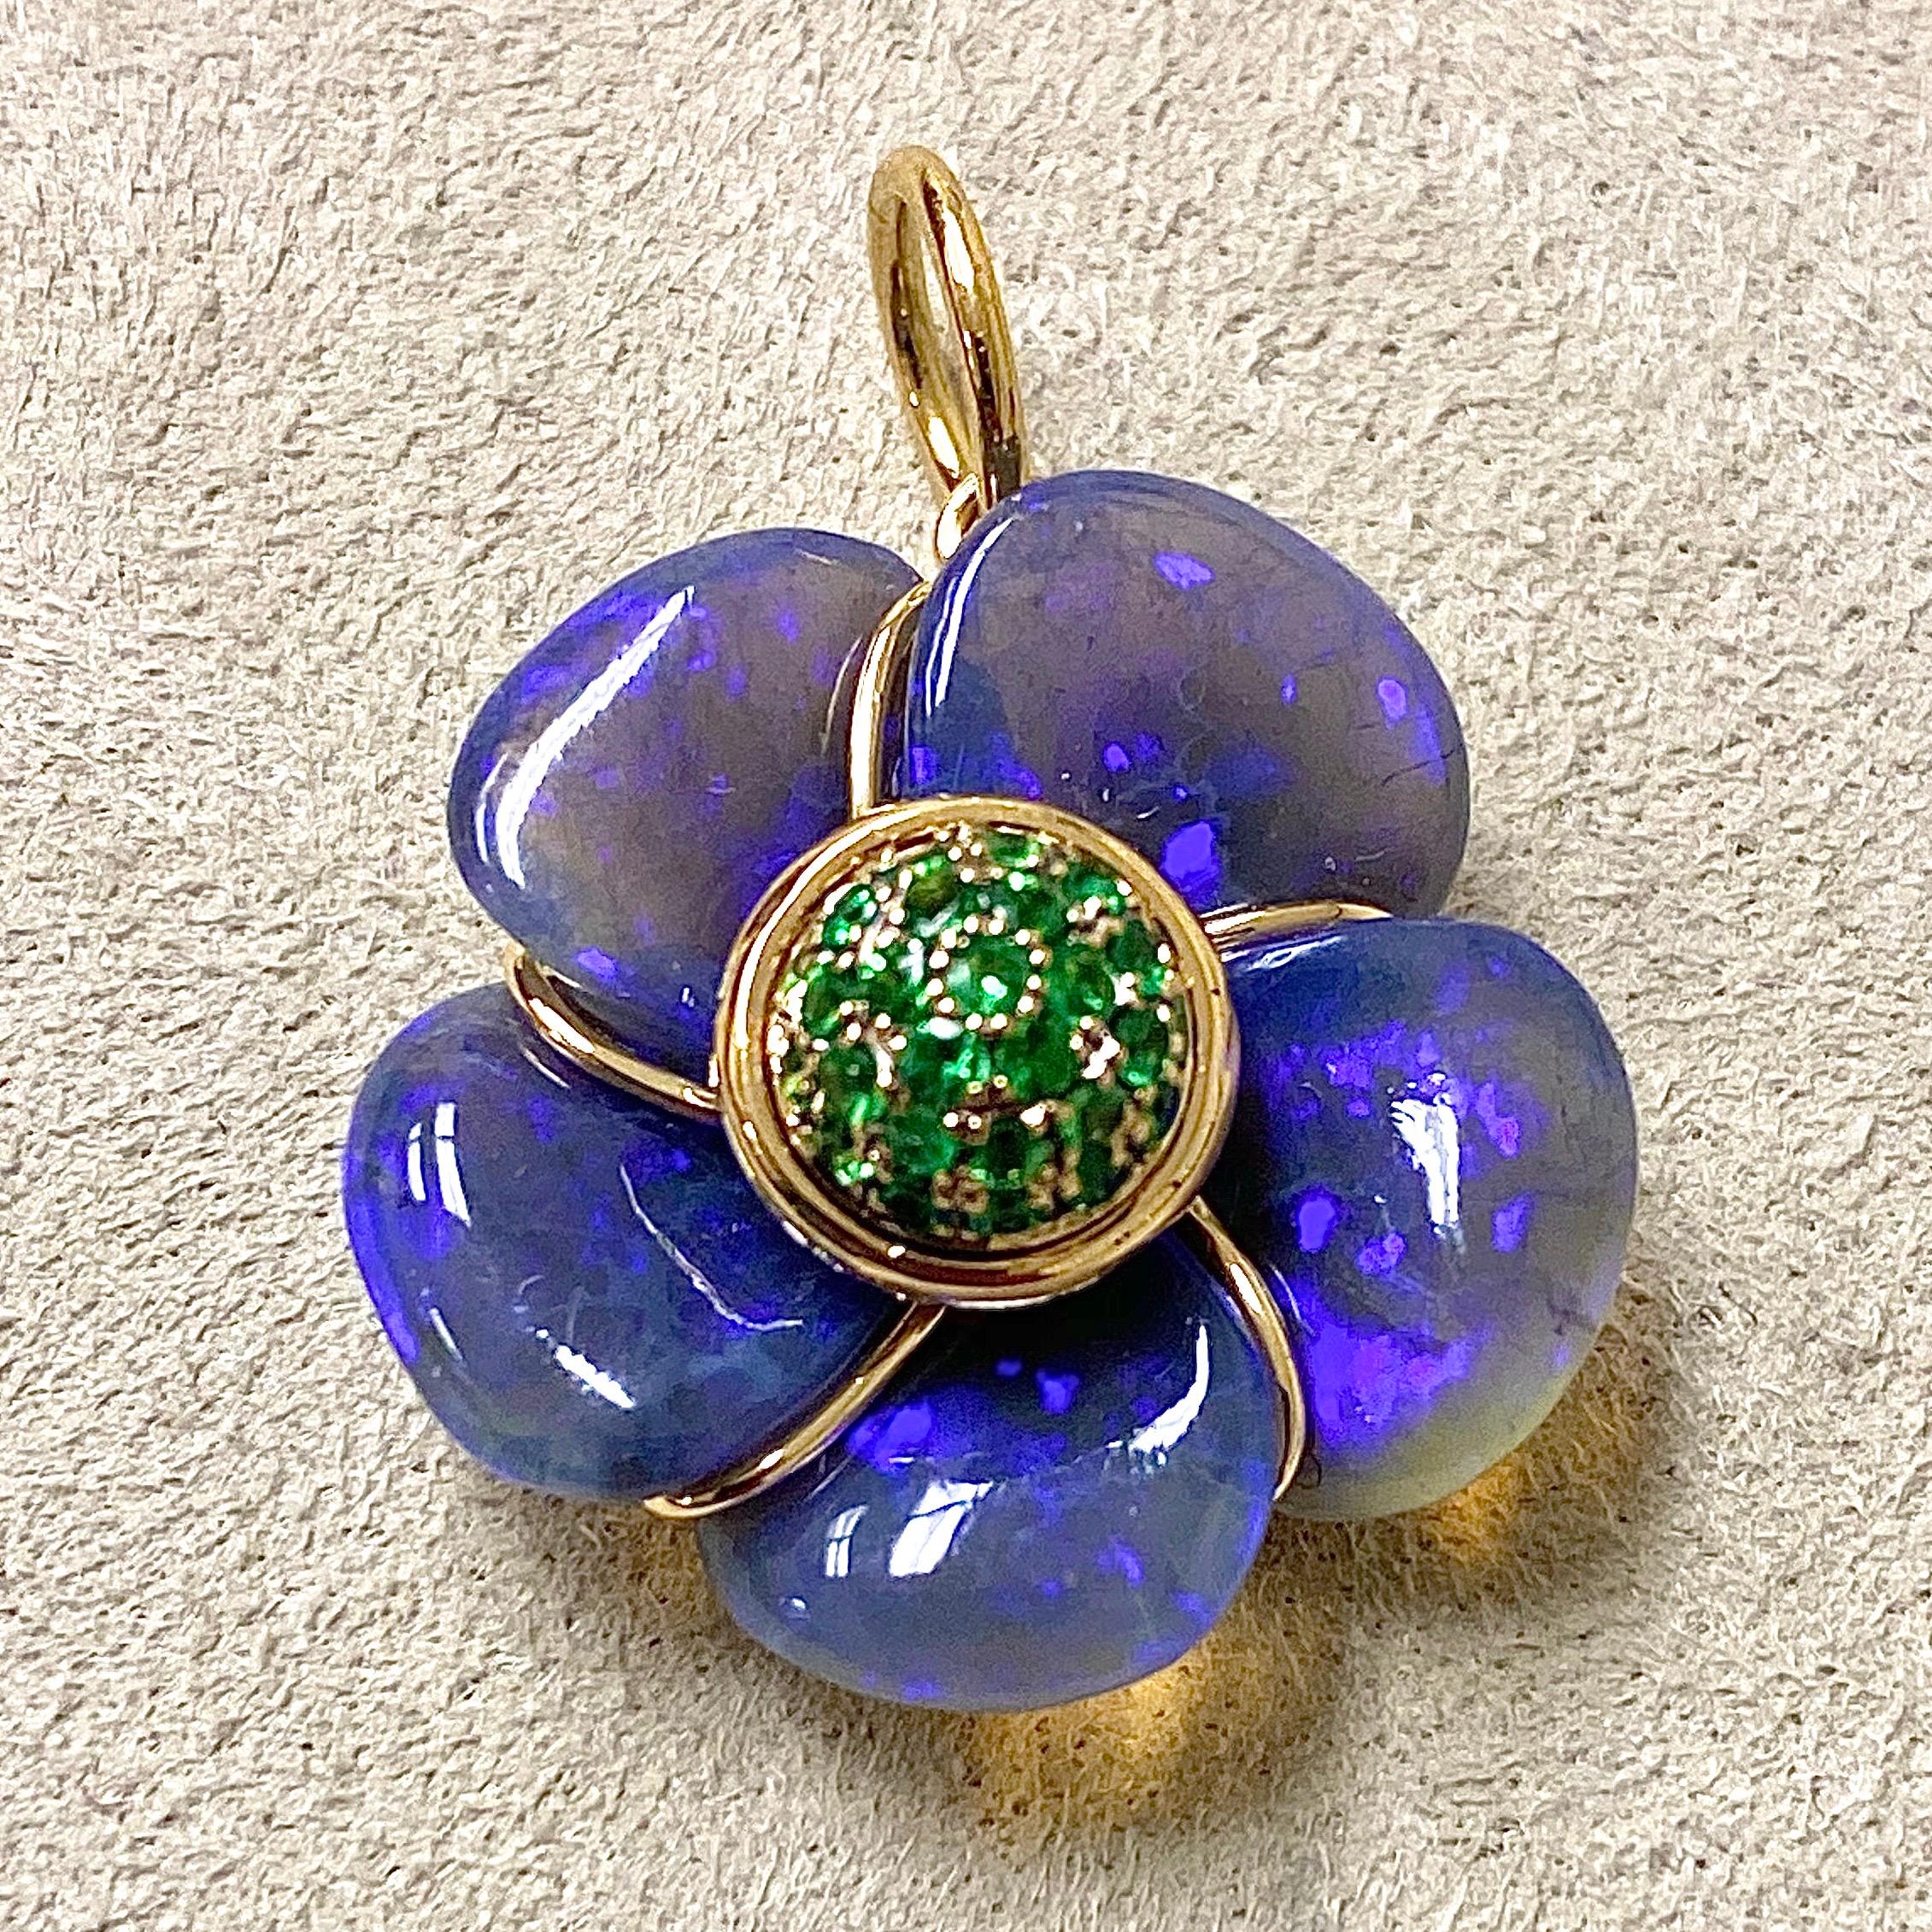 Contemporary Syna Handcarved Opal Flower Pendant with Tsavorite